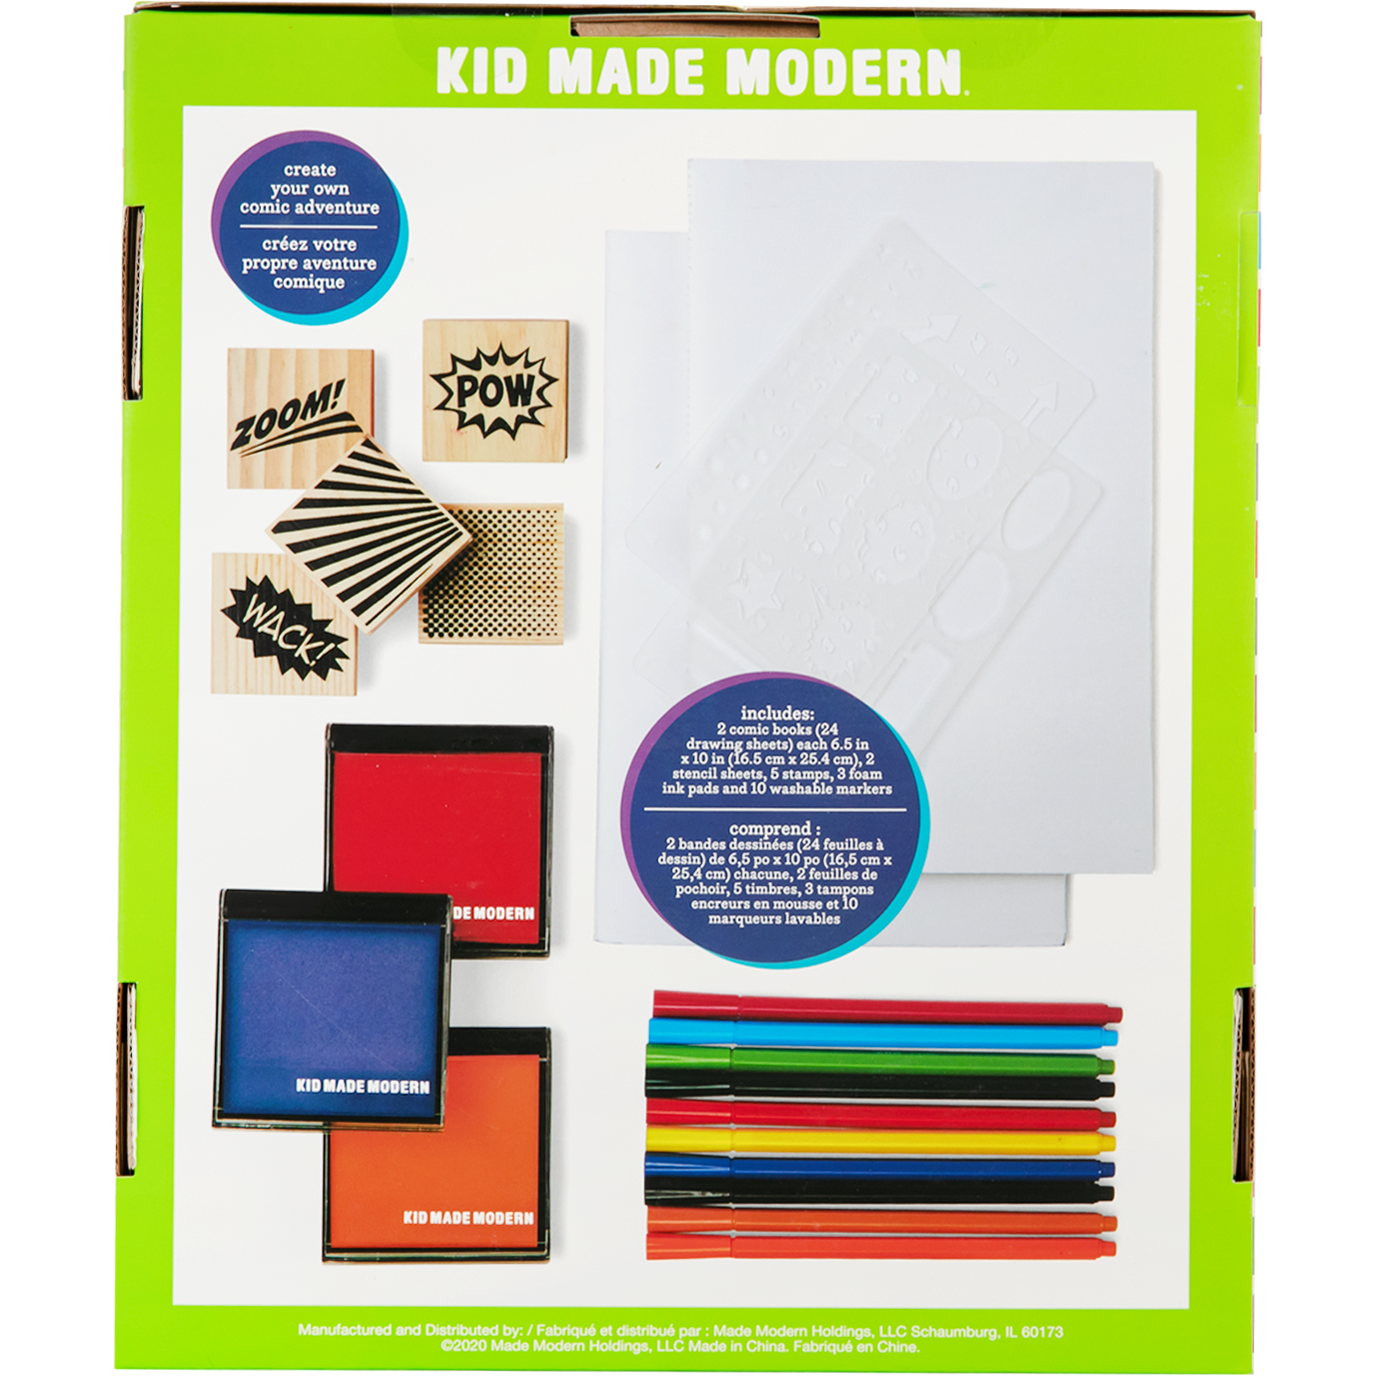 Kid Made Modern - Comic Book Kit Mod at a low cost - Browse Our Range